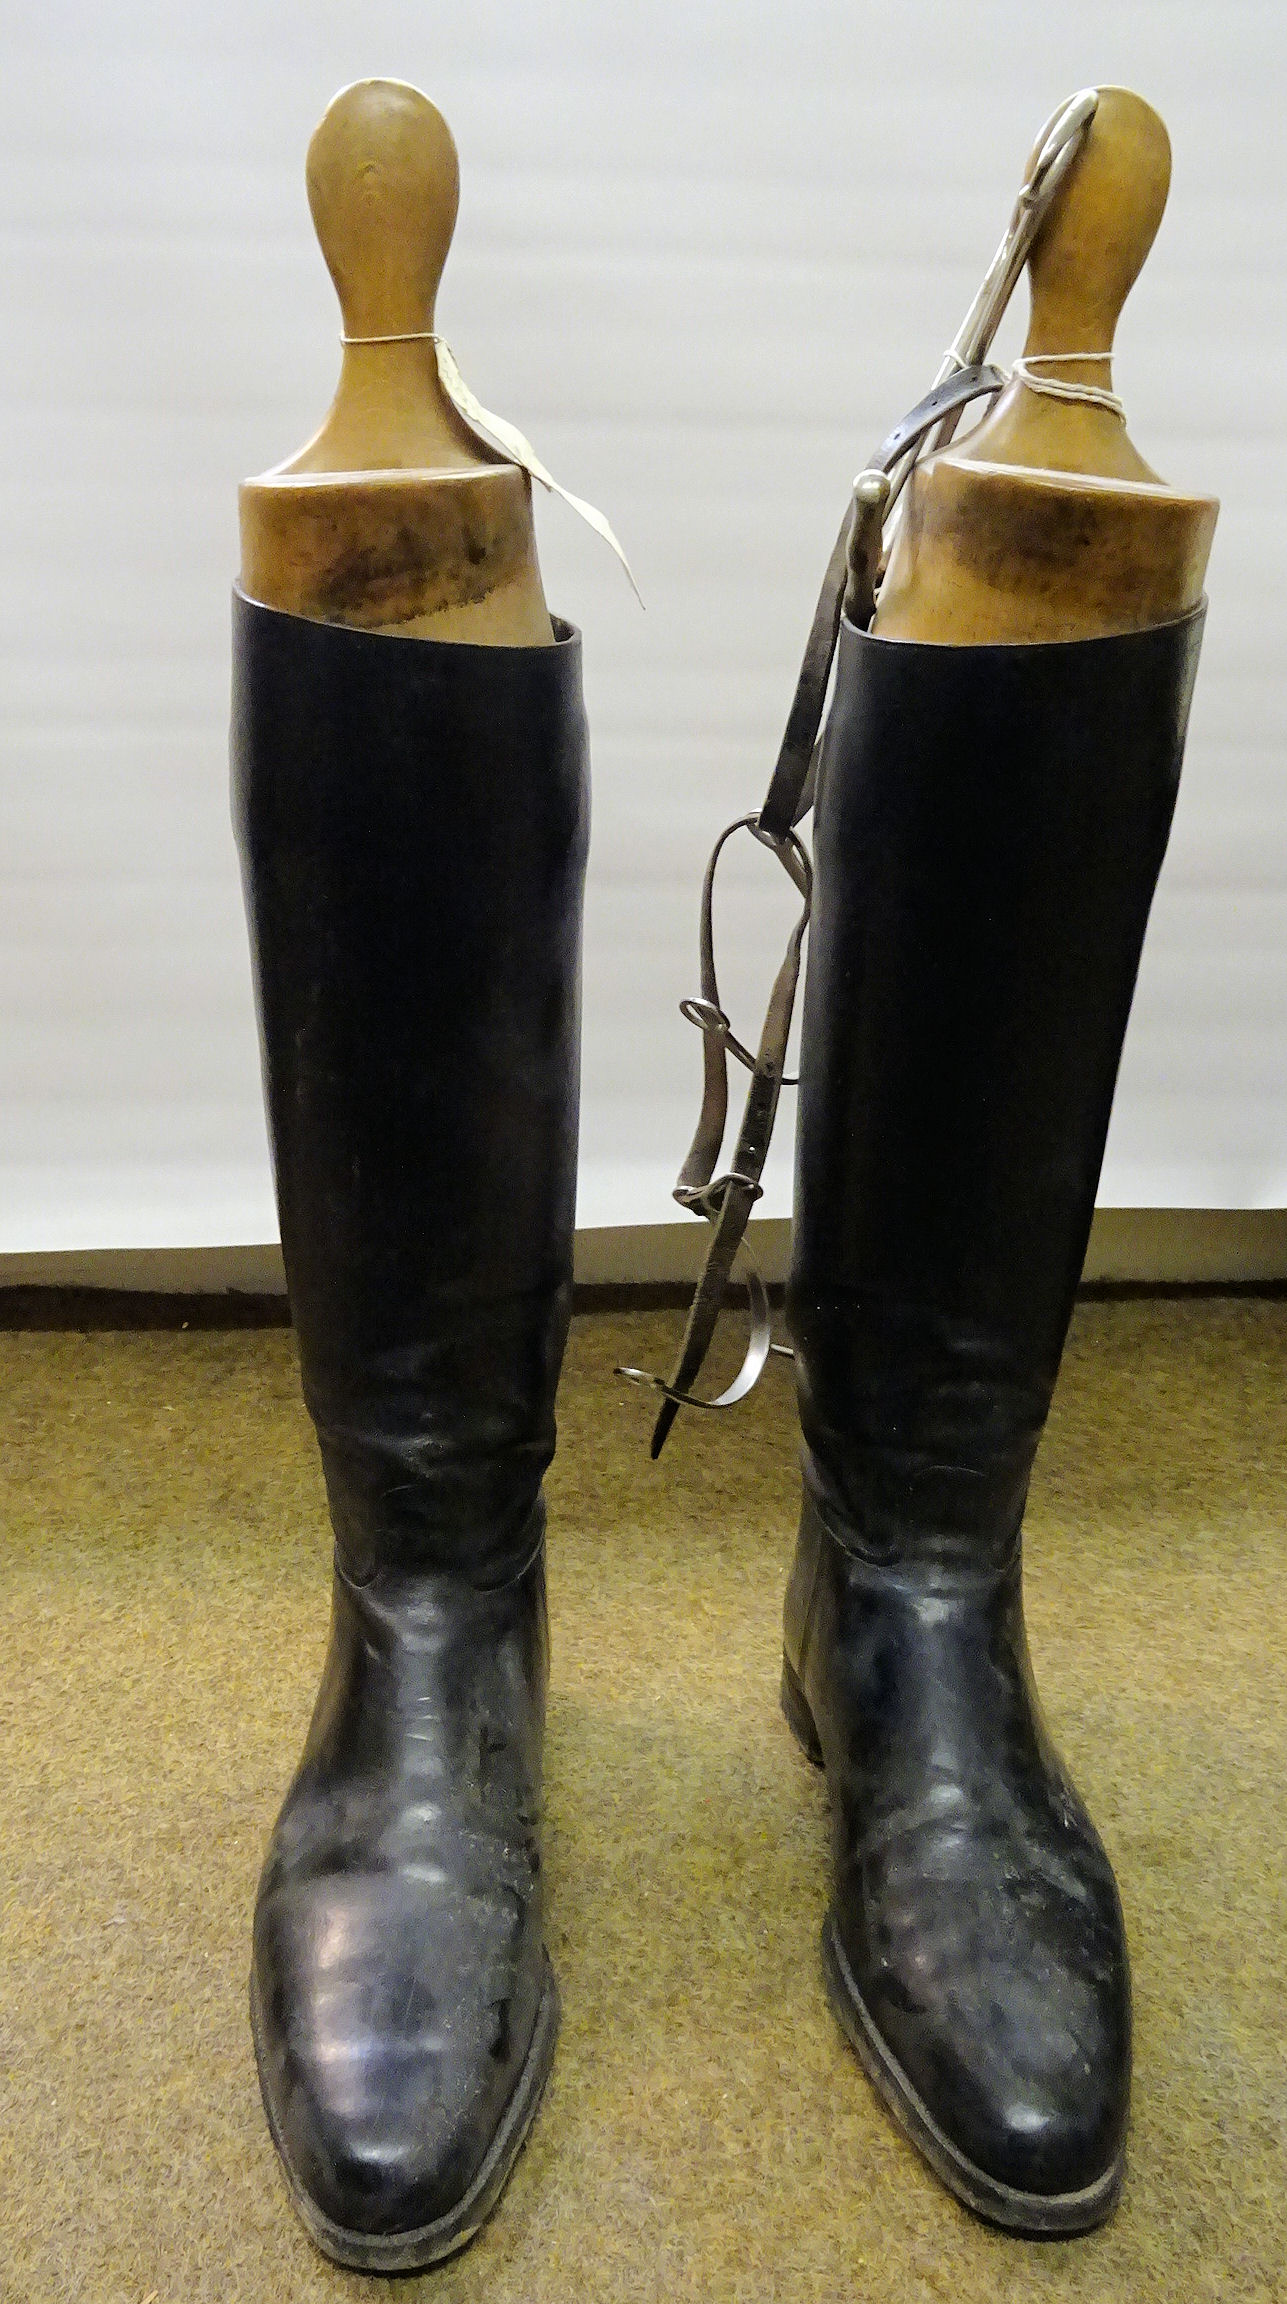 A pair of Gentleman's black Hunting Boots with wooden trees, boot pulls and spurs.